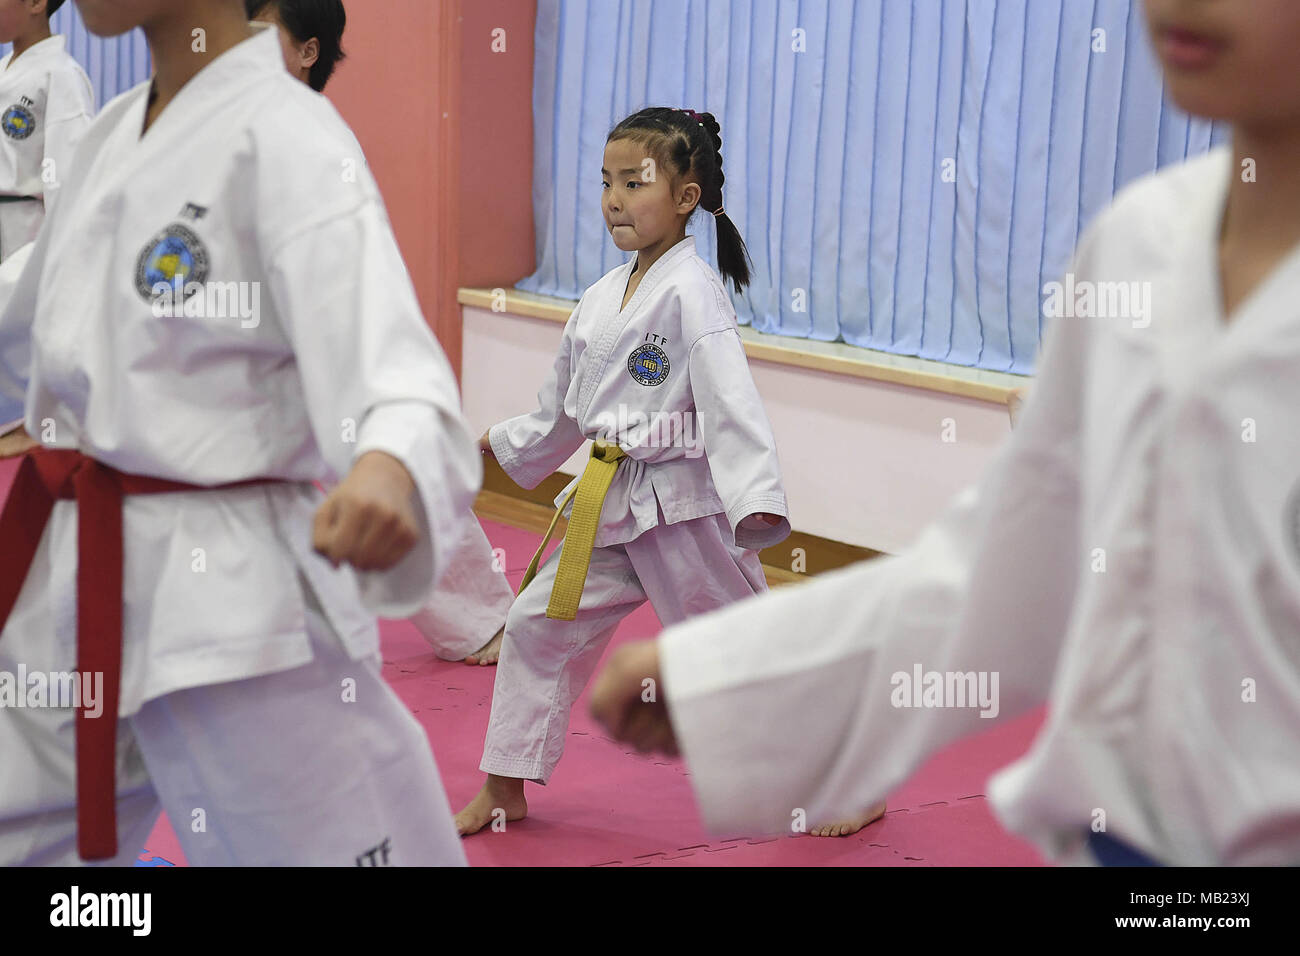 Pyeongyang, NORTH KOREA. 3rd Apr, 2018. March 3, 2018-Pyeongyang, North Korea-North Korean students at the Mankyungdae Boys ' Palace take taekwondo lessons. The date approaches, for better or worse. On April 27, the leaders from the two Koreas, technically still at war, will hold a summit at the border. The parties met today to work out security details. To hold talks with South Korean president Moon Jae-in, the leader of North Korea, Kim Jong-un, will take unprecedented steps for a man in his position literally. The summit will be held south of the military demarcation line in the truce vil Stock Photo